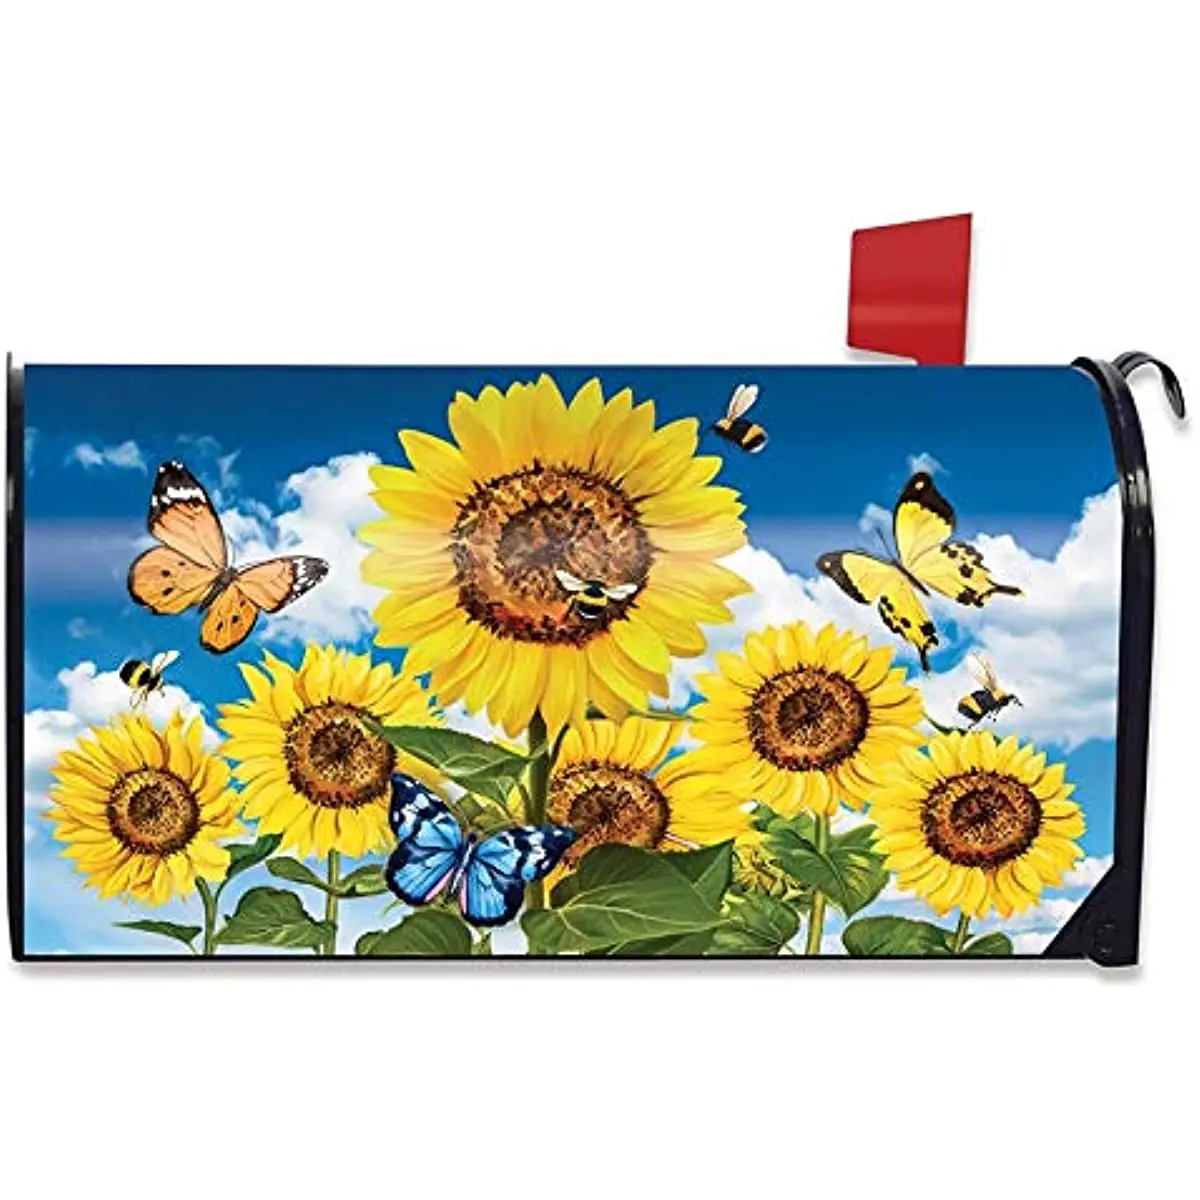 

Sunflowers and Bees Summer Magnetic Mailbox Cover Floral Standard